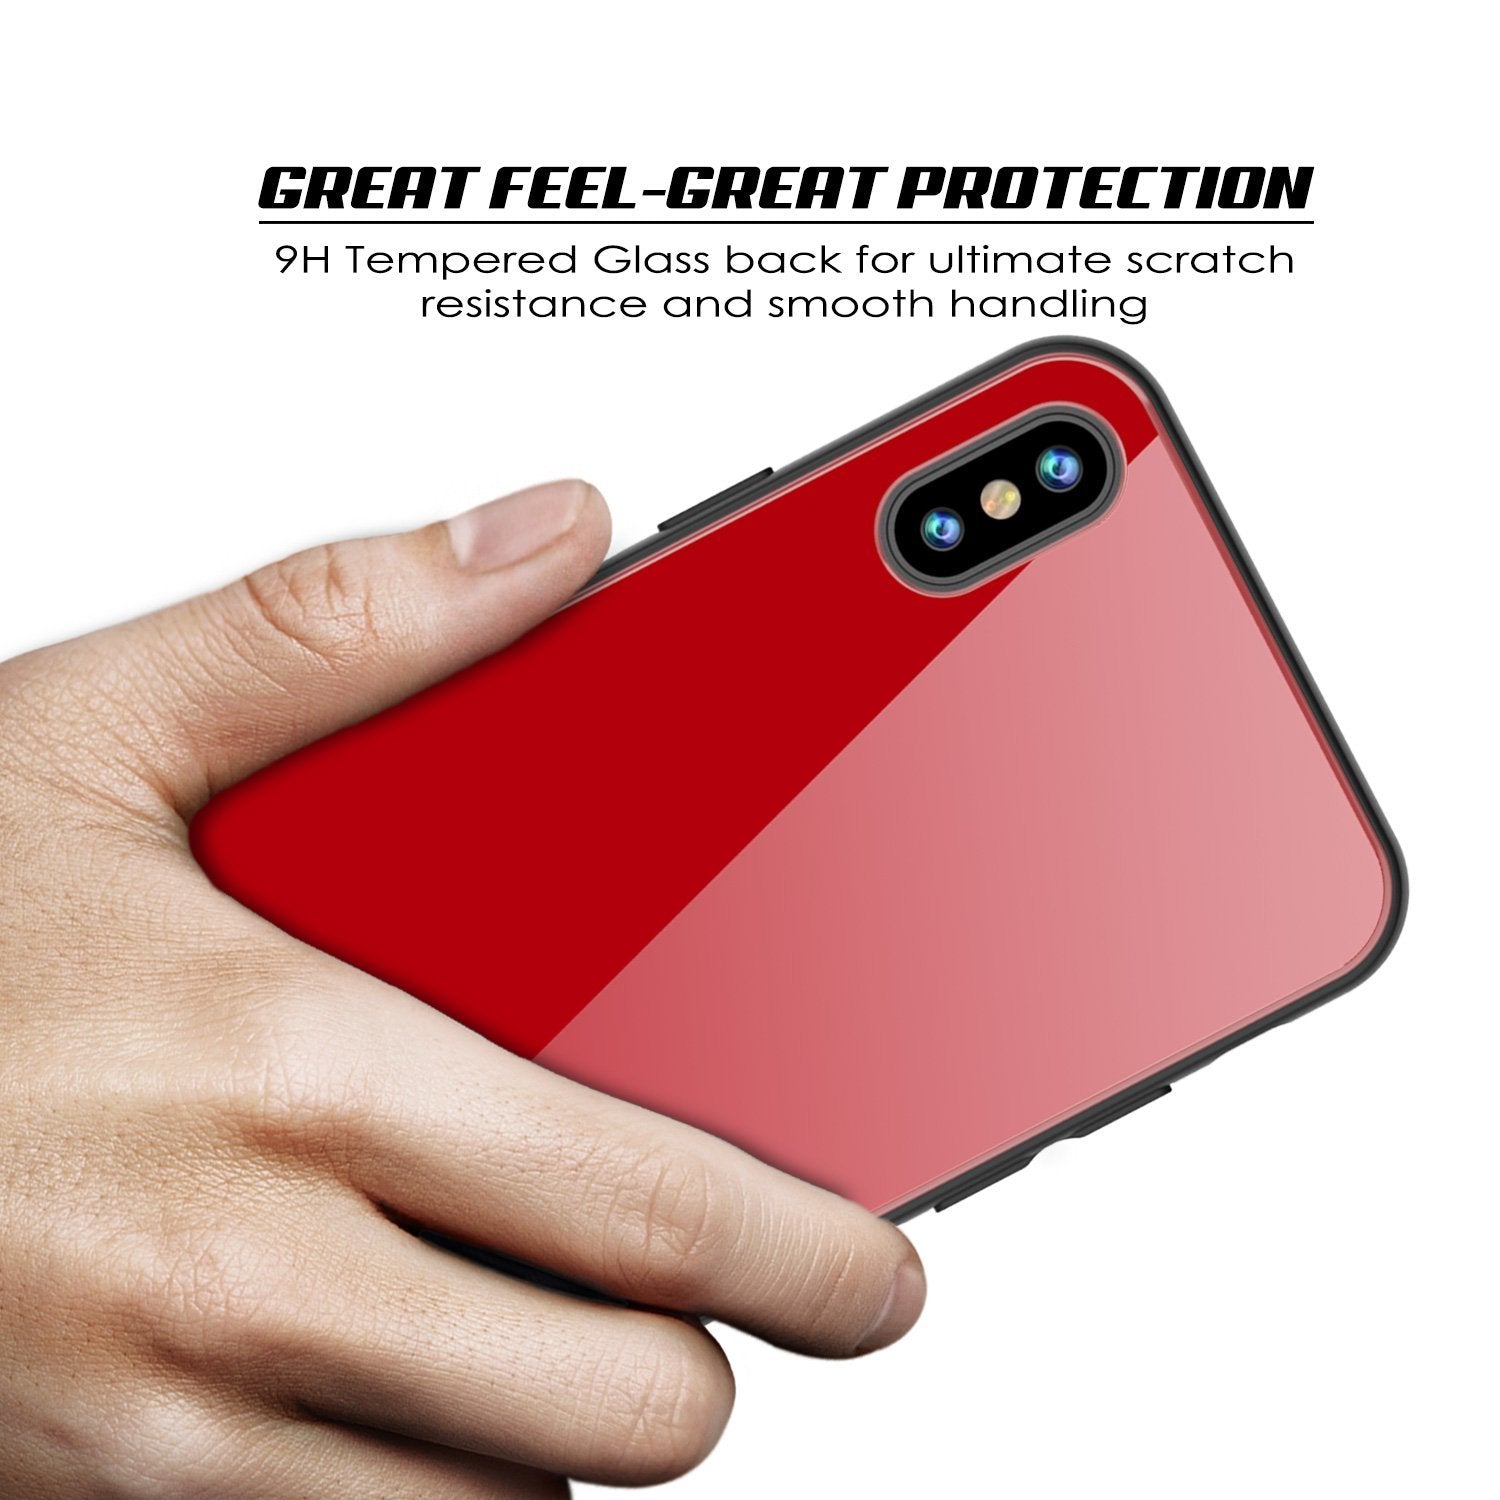 iPhone 8 Case, Punkcase GlassShield Ultra Thin Protective 9H Full Body Tempered Glass Cover W/ Drop Protection & Non Slip Grip for Apple iPhone 7 / Apple iPhone 8 (Red) - PunkCase NZ